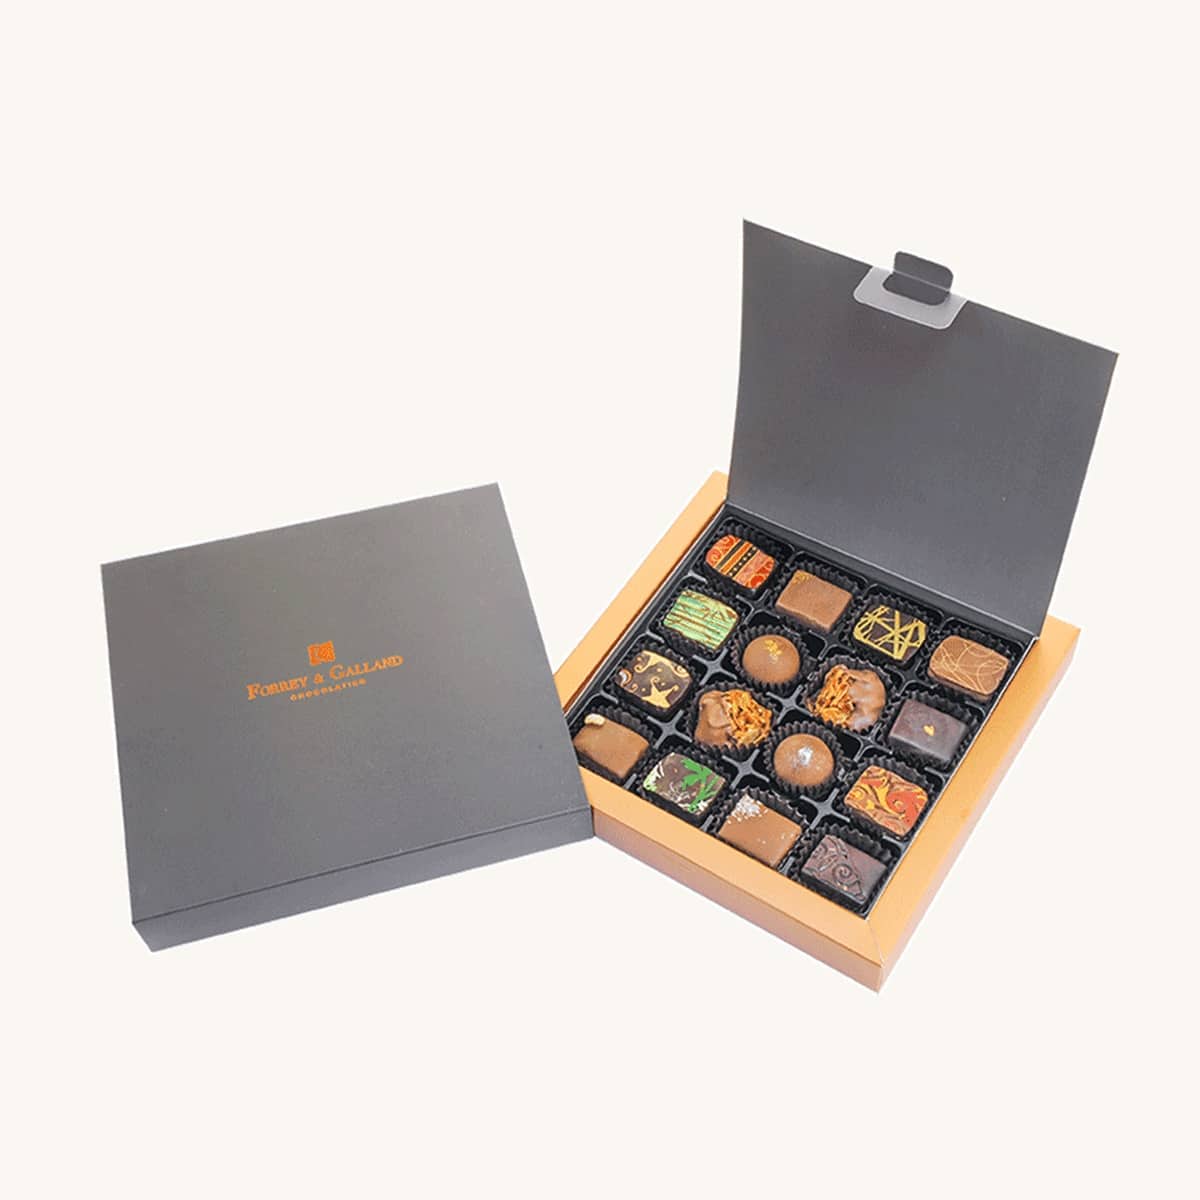 Forrey & Galland premium classic chocolate box filled with 16 pieces of handmade chocolates